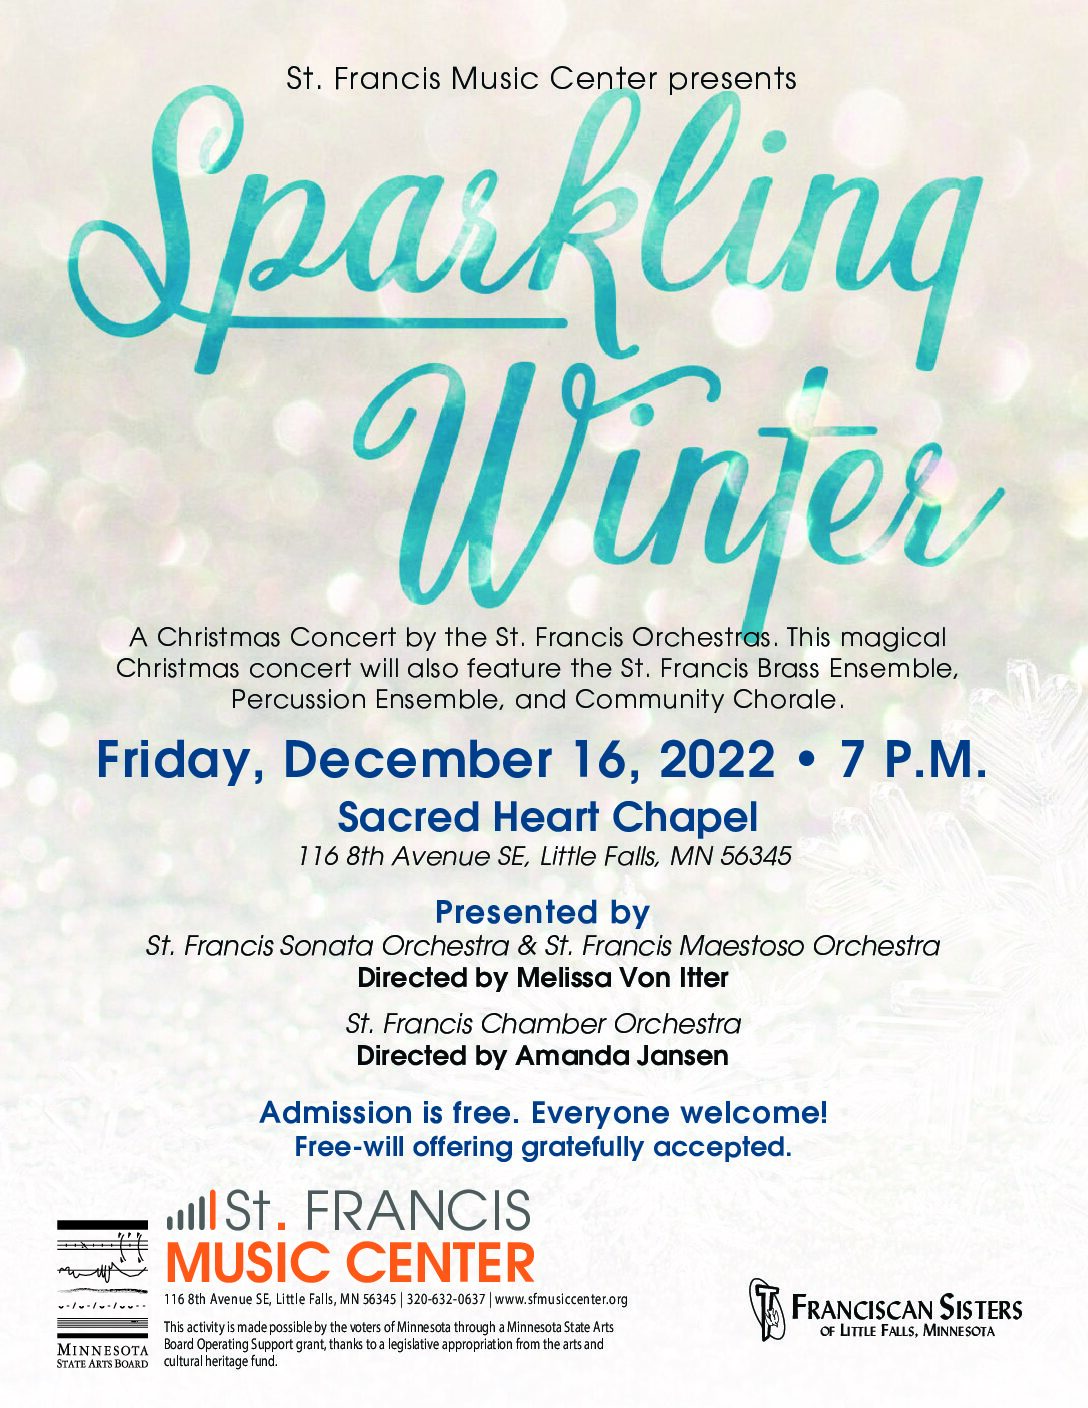 St. Francis Orchestras Christmas Concert